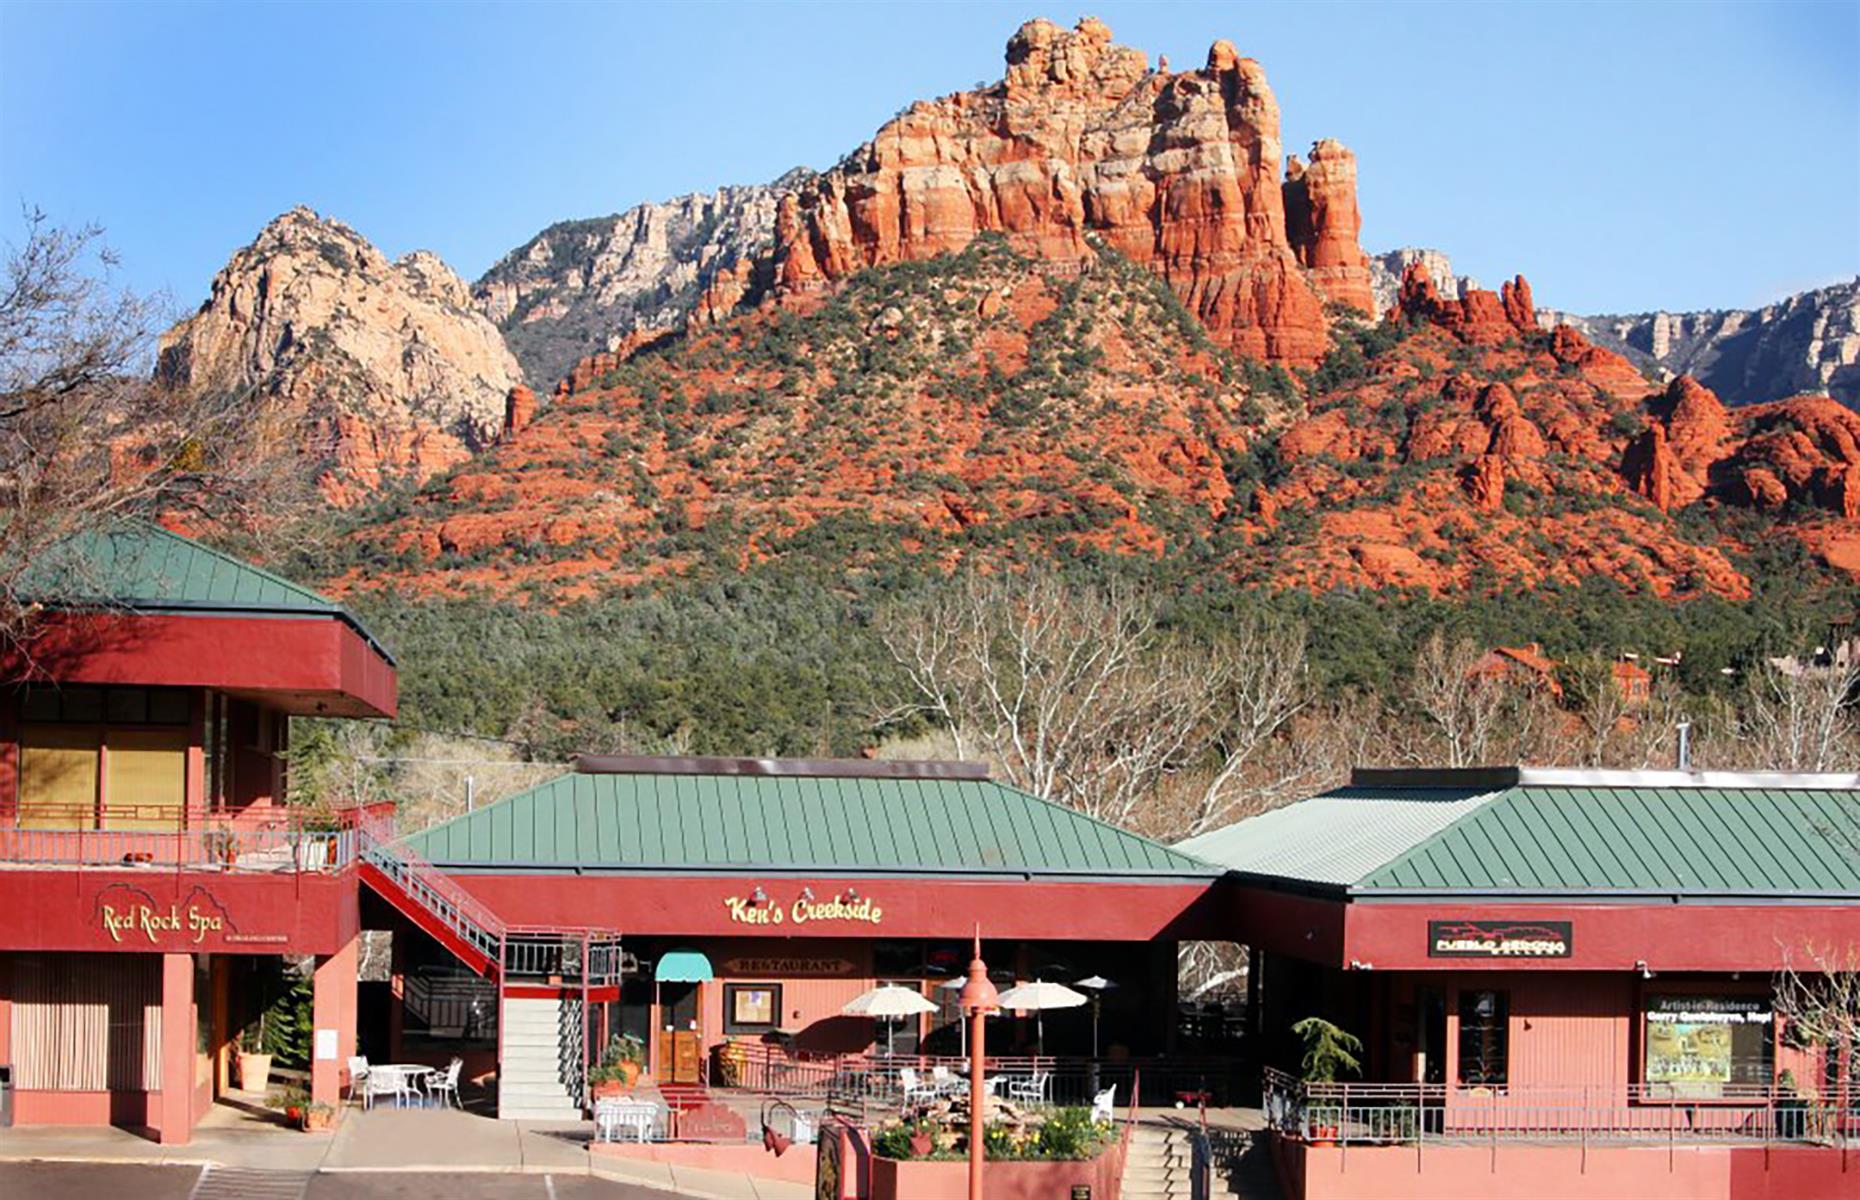 <p>Patio seating and a dog menu make this <a href="https://creeksidesedona.com/">one of Arizona's most pet-friendly restaurants</a>, but it's also one of its <a href="https://www.yelp.com/biz/creekside-sedona-sedona">most memorable</a> thanks to its position on Oak Creek. From here, you get spectacular red rock views, served alongside a locally sourced, ever-changing menu. Expect healthy breakfasts like granola and yogurt, hummus and quinoa tabbouleh for lunch, as well as soups, salads and breakfast burritos. The dog menu has cheese omelets, venison and dog-friendly cookies too. Don't walk out without a bottle of the chef's own hot sauce.</p>